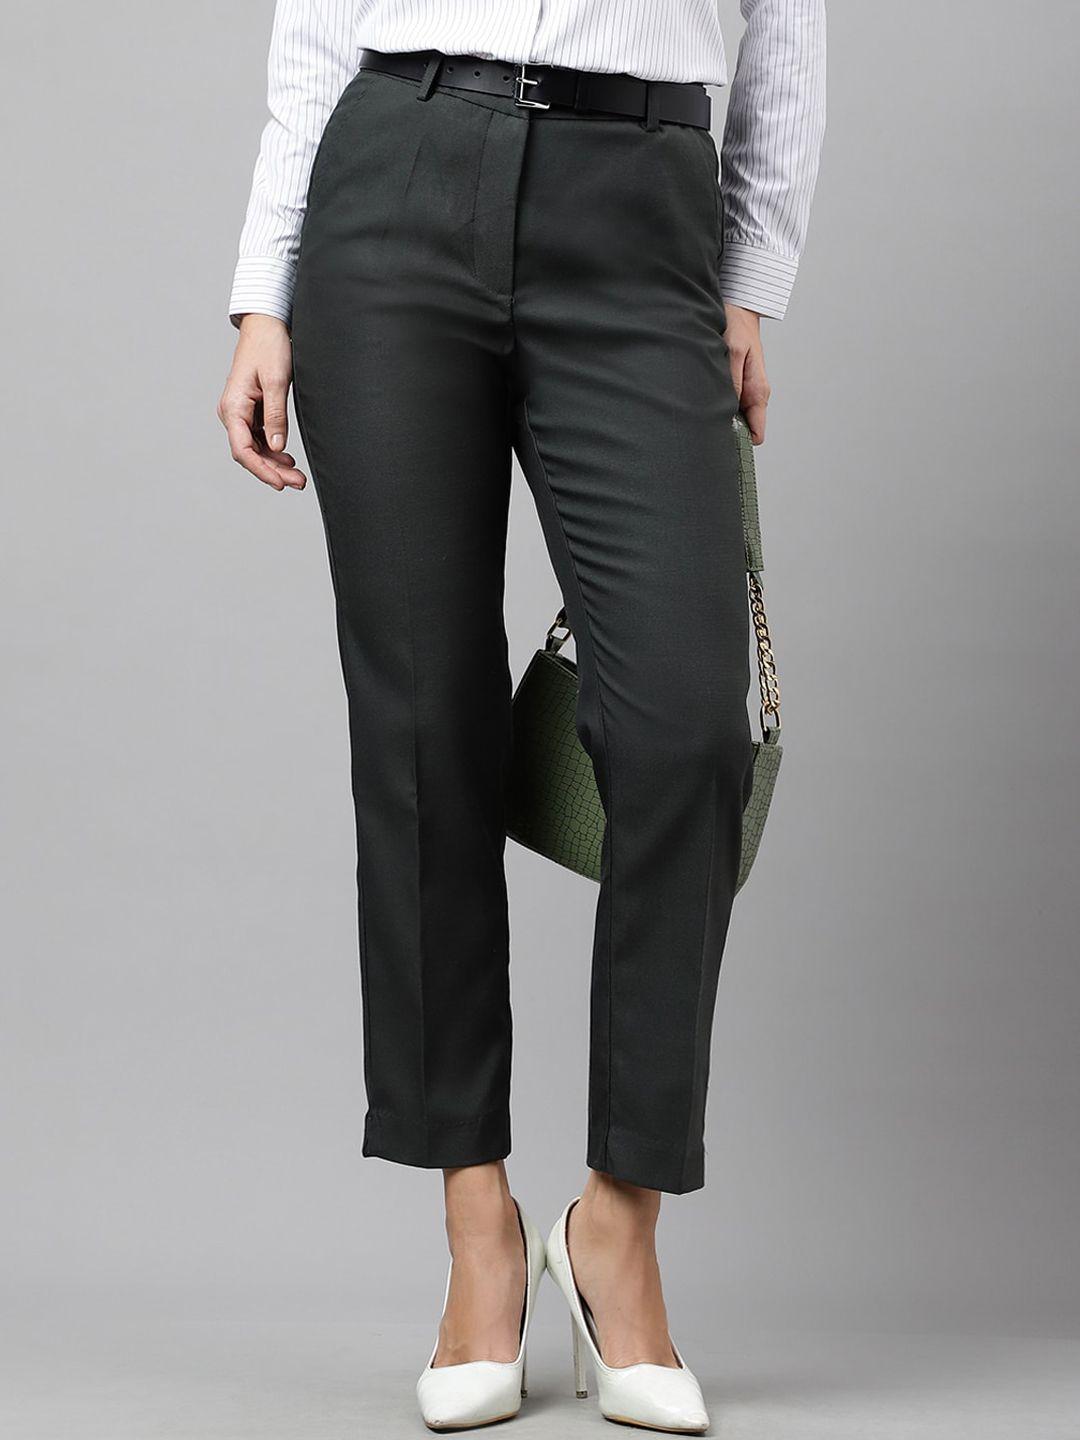 english-navy-women-slim-fit-high-rise-wrinkle-free-elastane-&-stretchable-formal-trousers